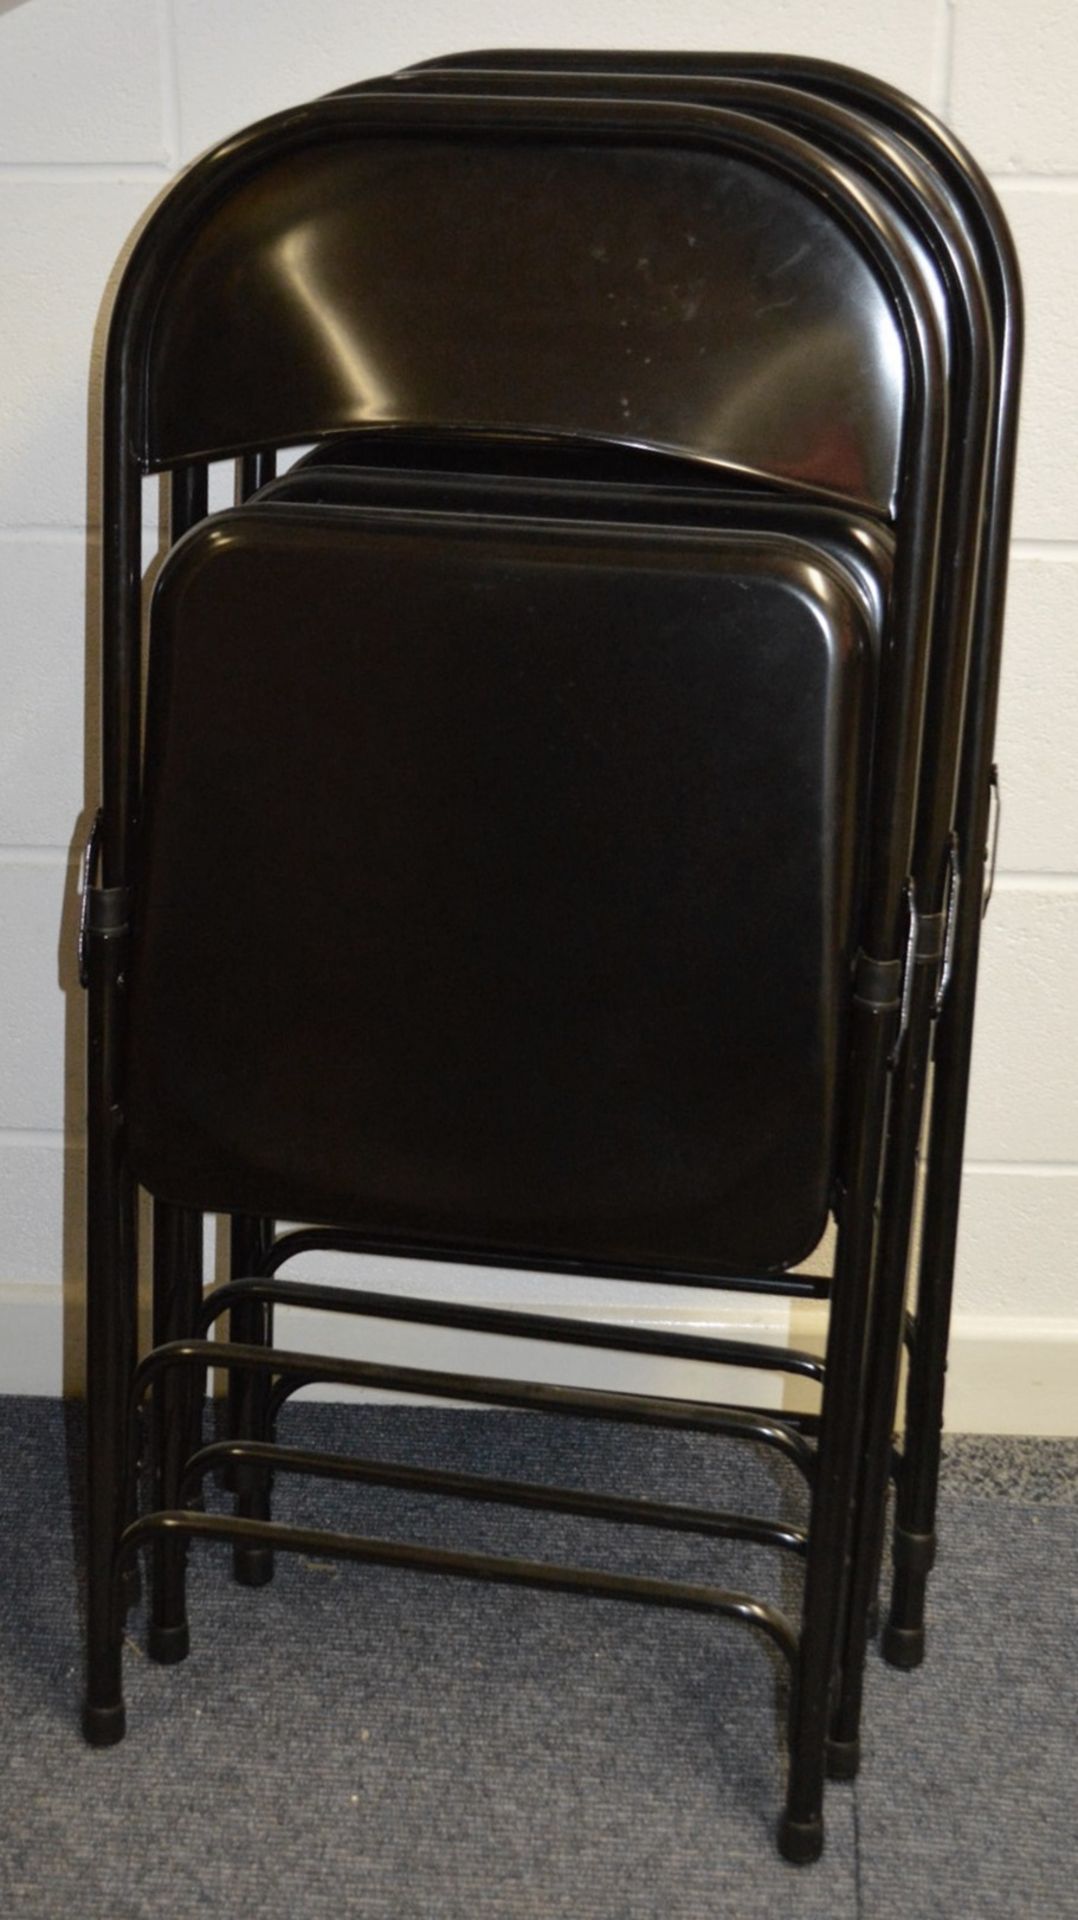 3 x HABITAT Folding Metal Chairs In Black - Dimensions: W47 x D50 x H80, Seat Height cm - Used, In - Image 4 of 4